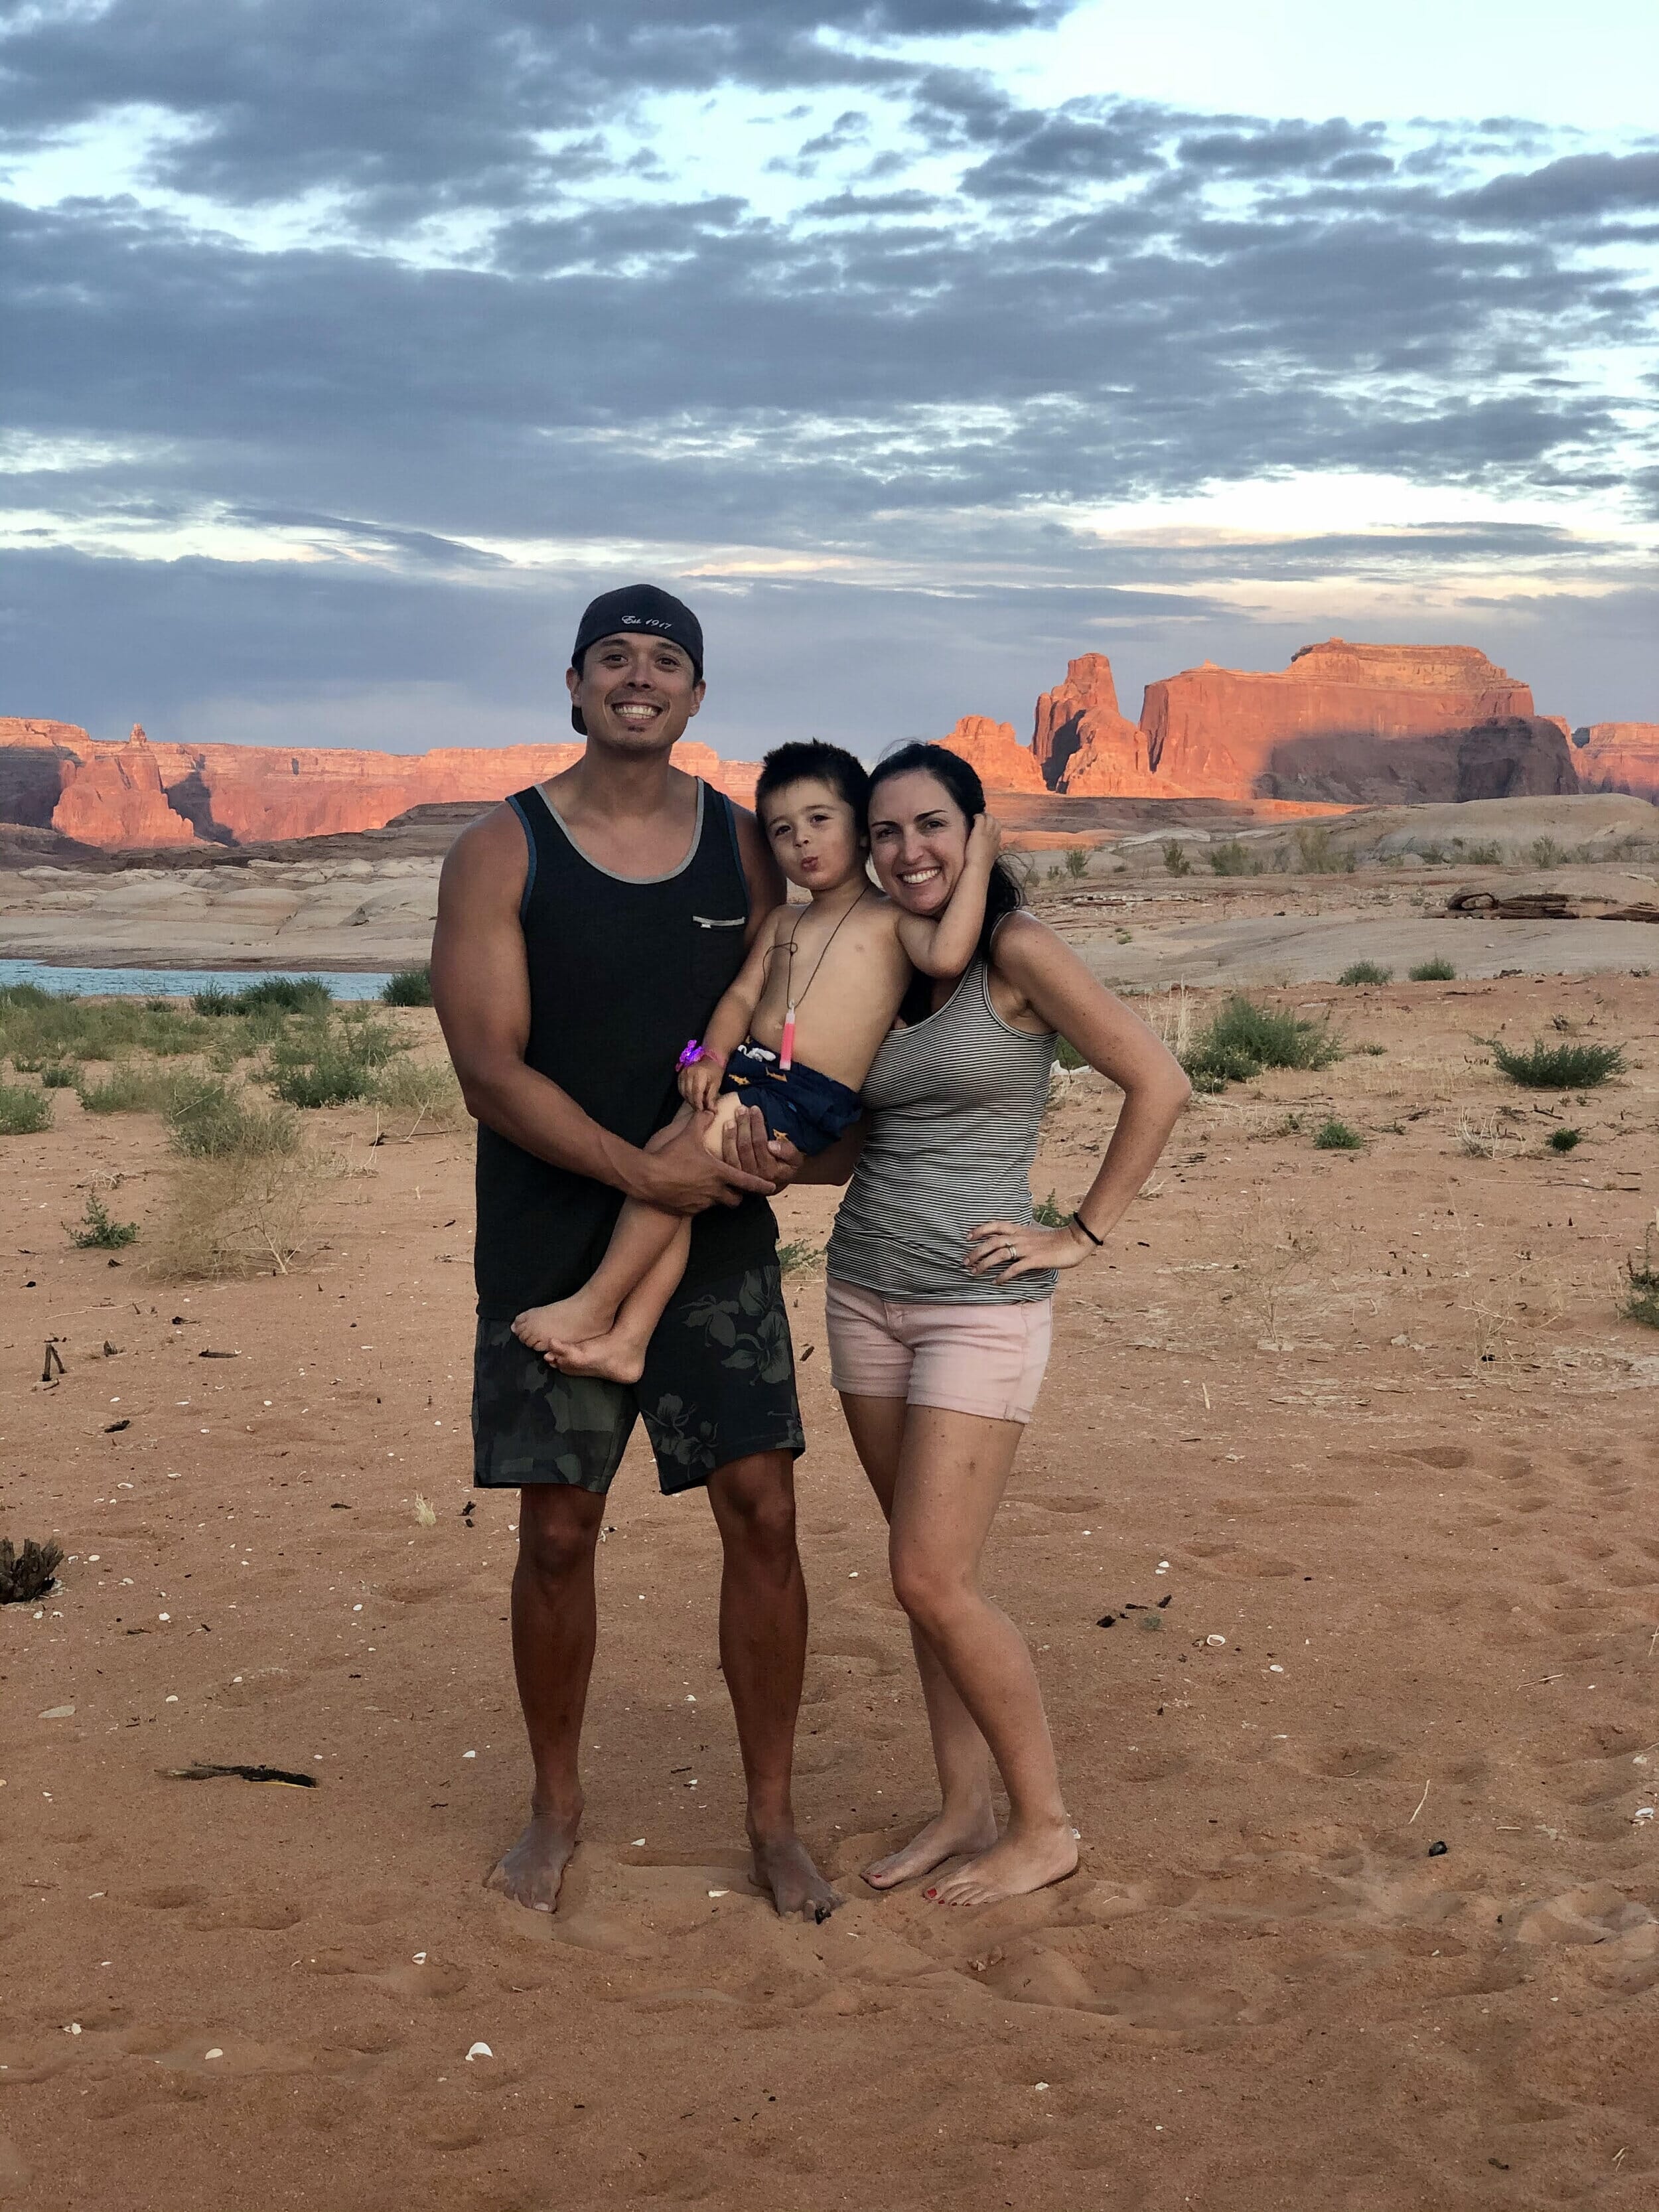 kimberly morrison with her family in the desert